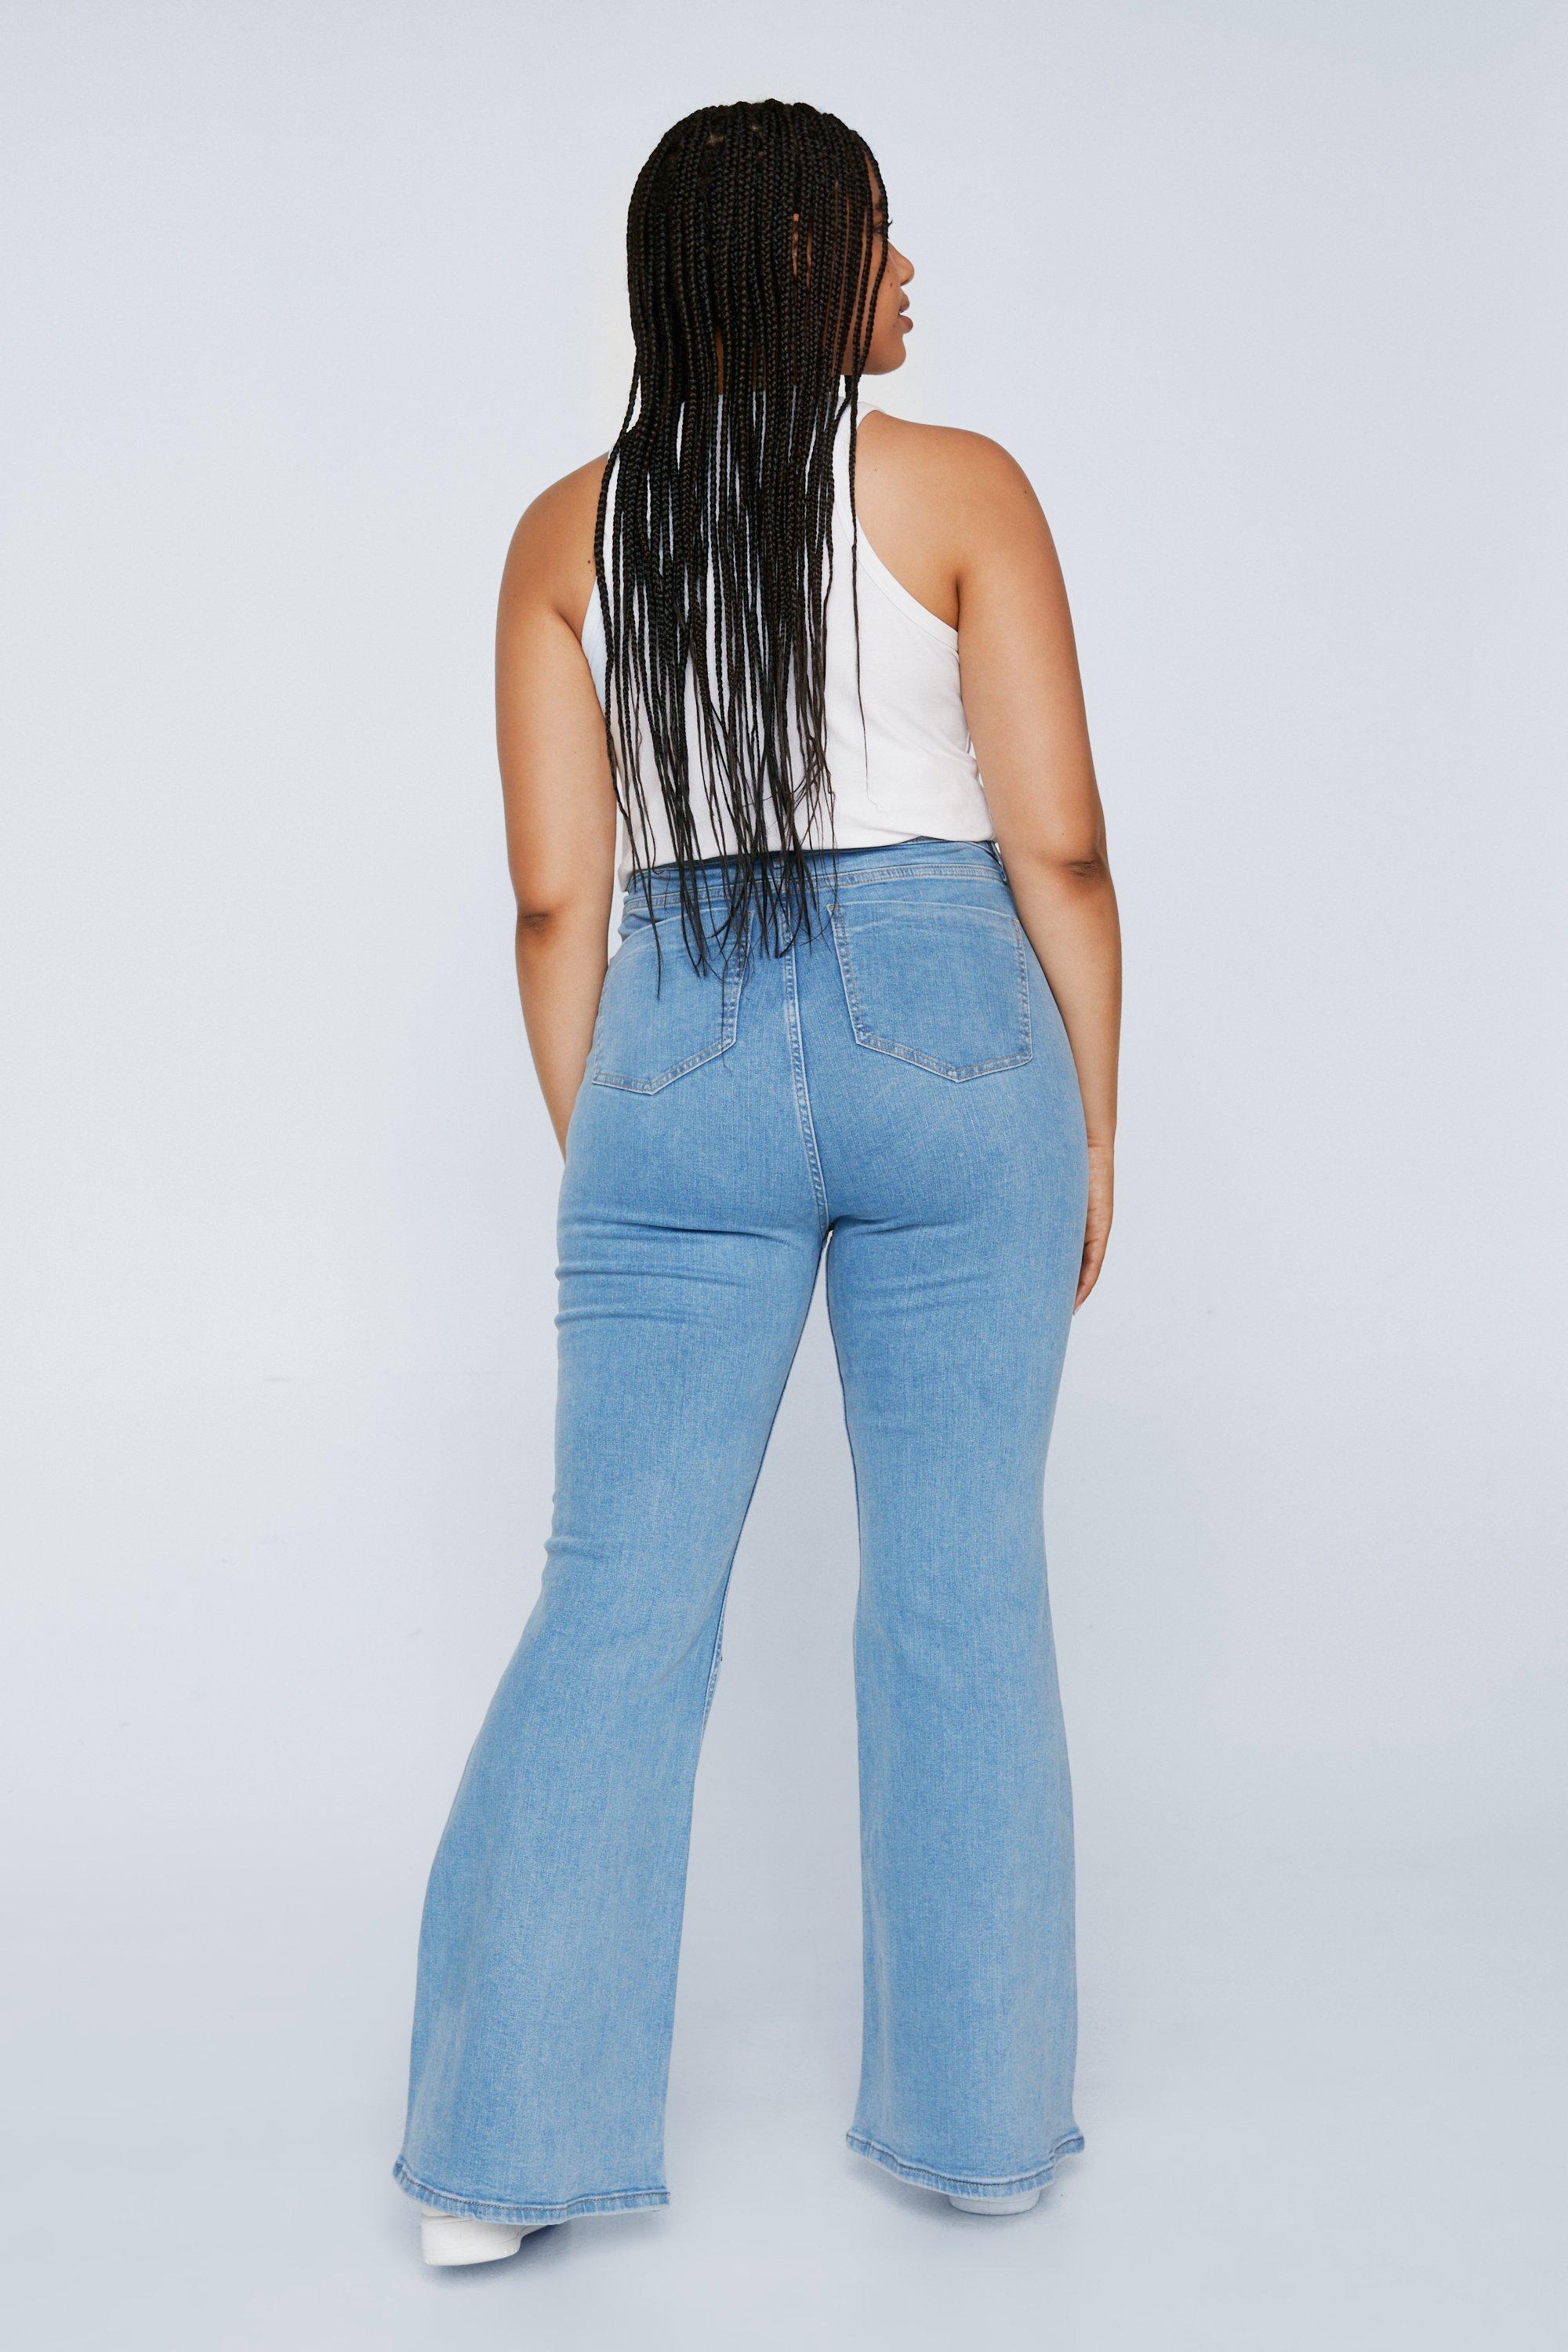 Plus Sequin Embroidered Jean | Nasty Gal